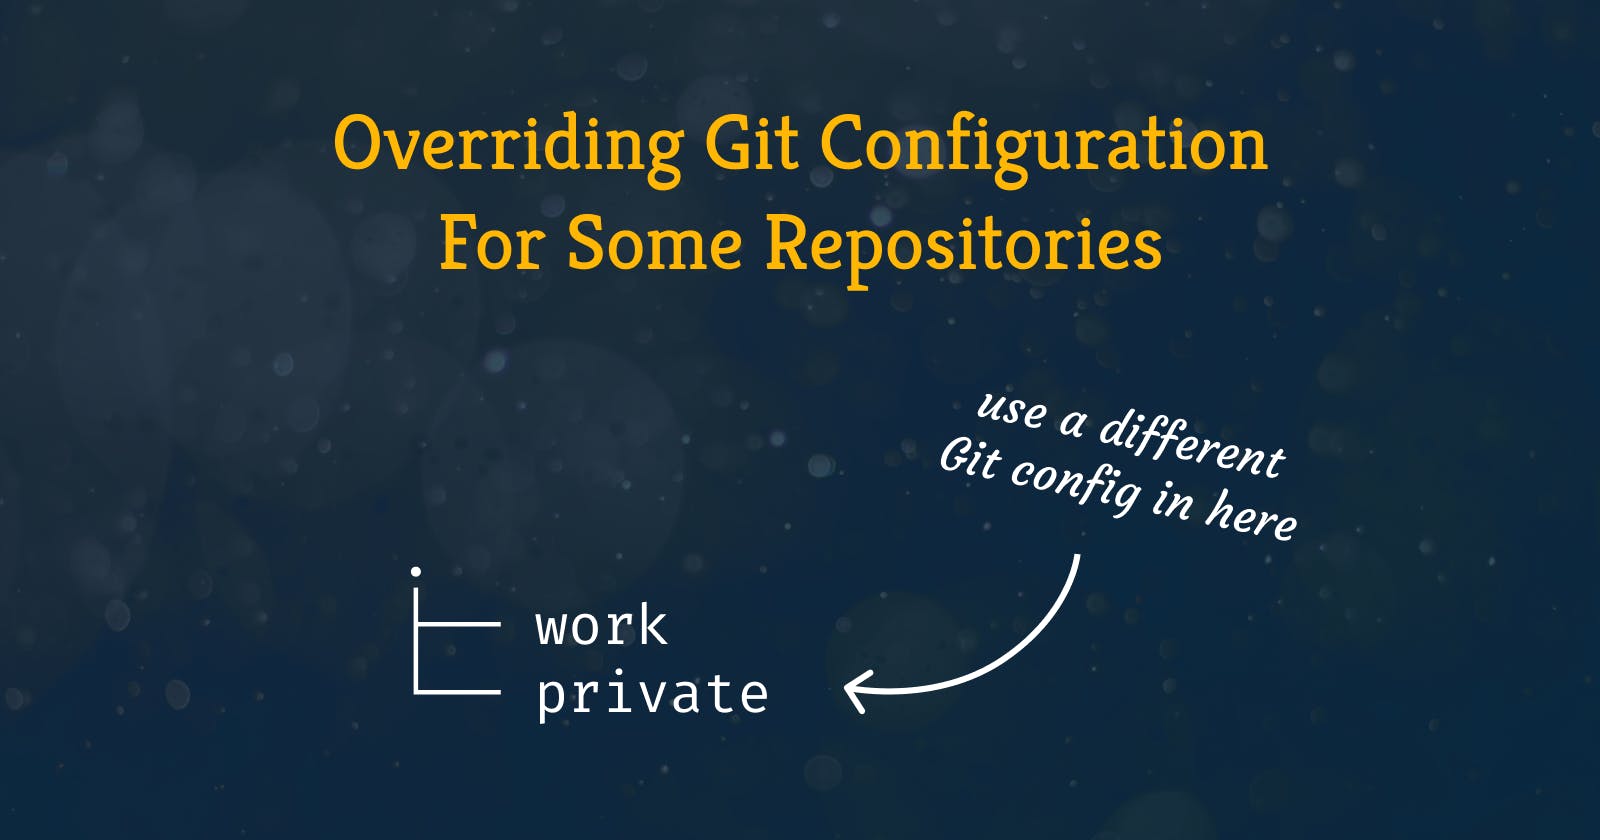 How To Use Different Git Configs